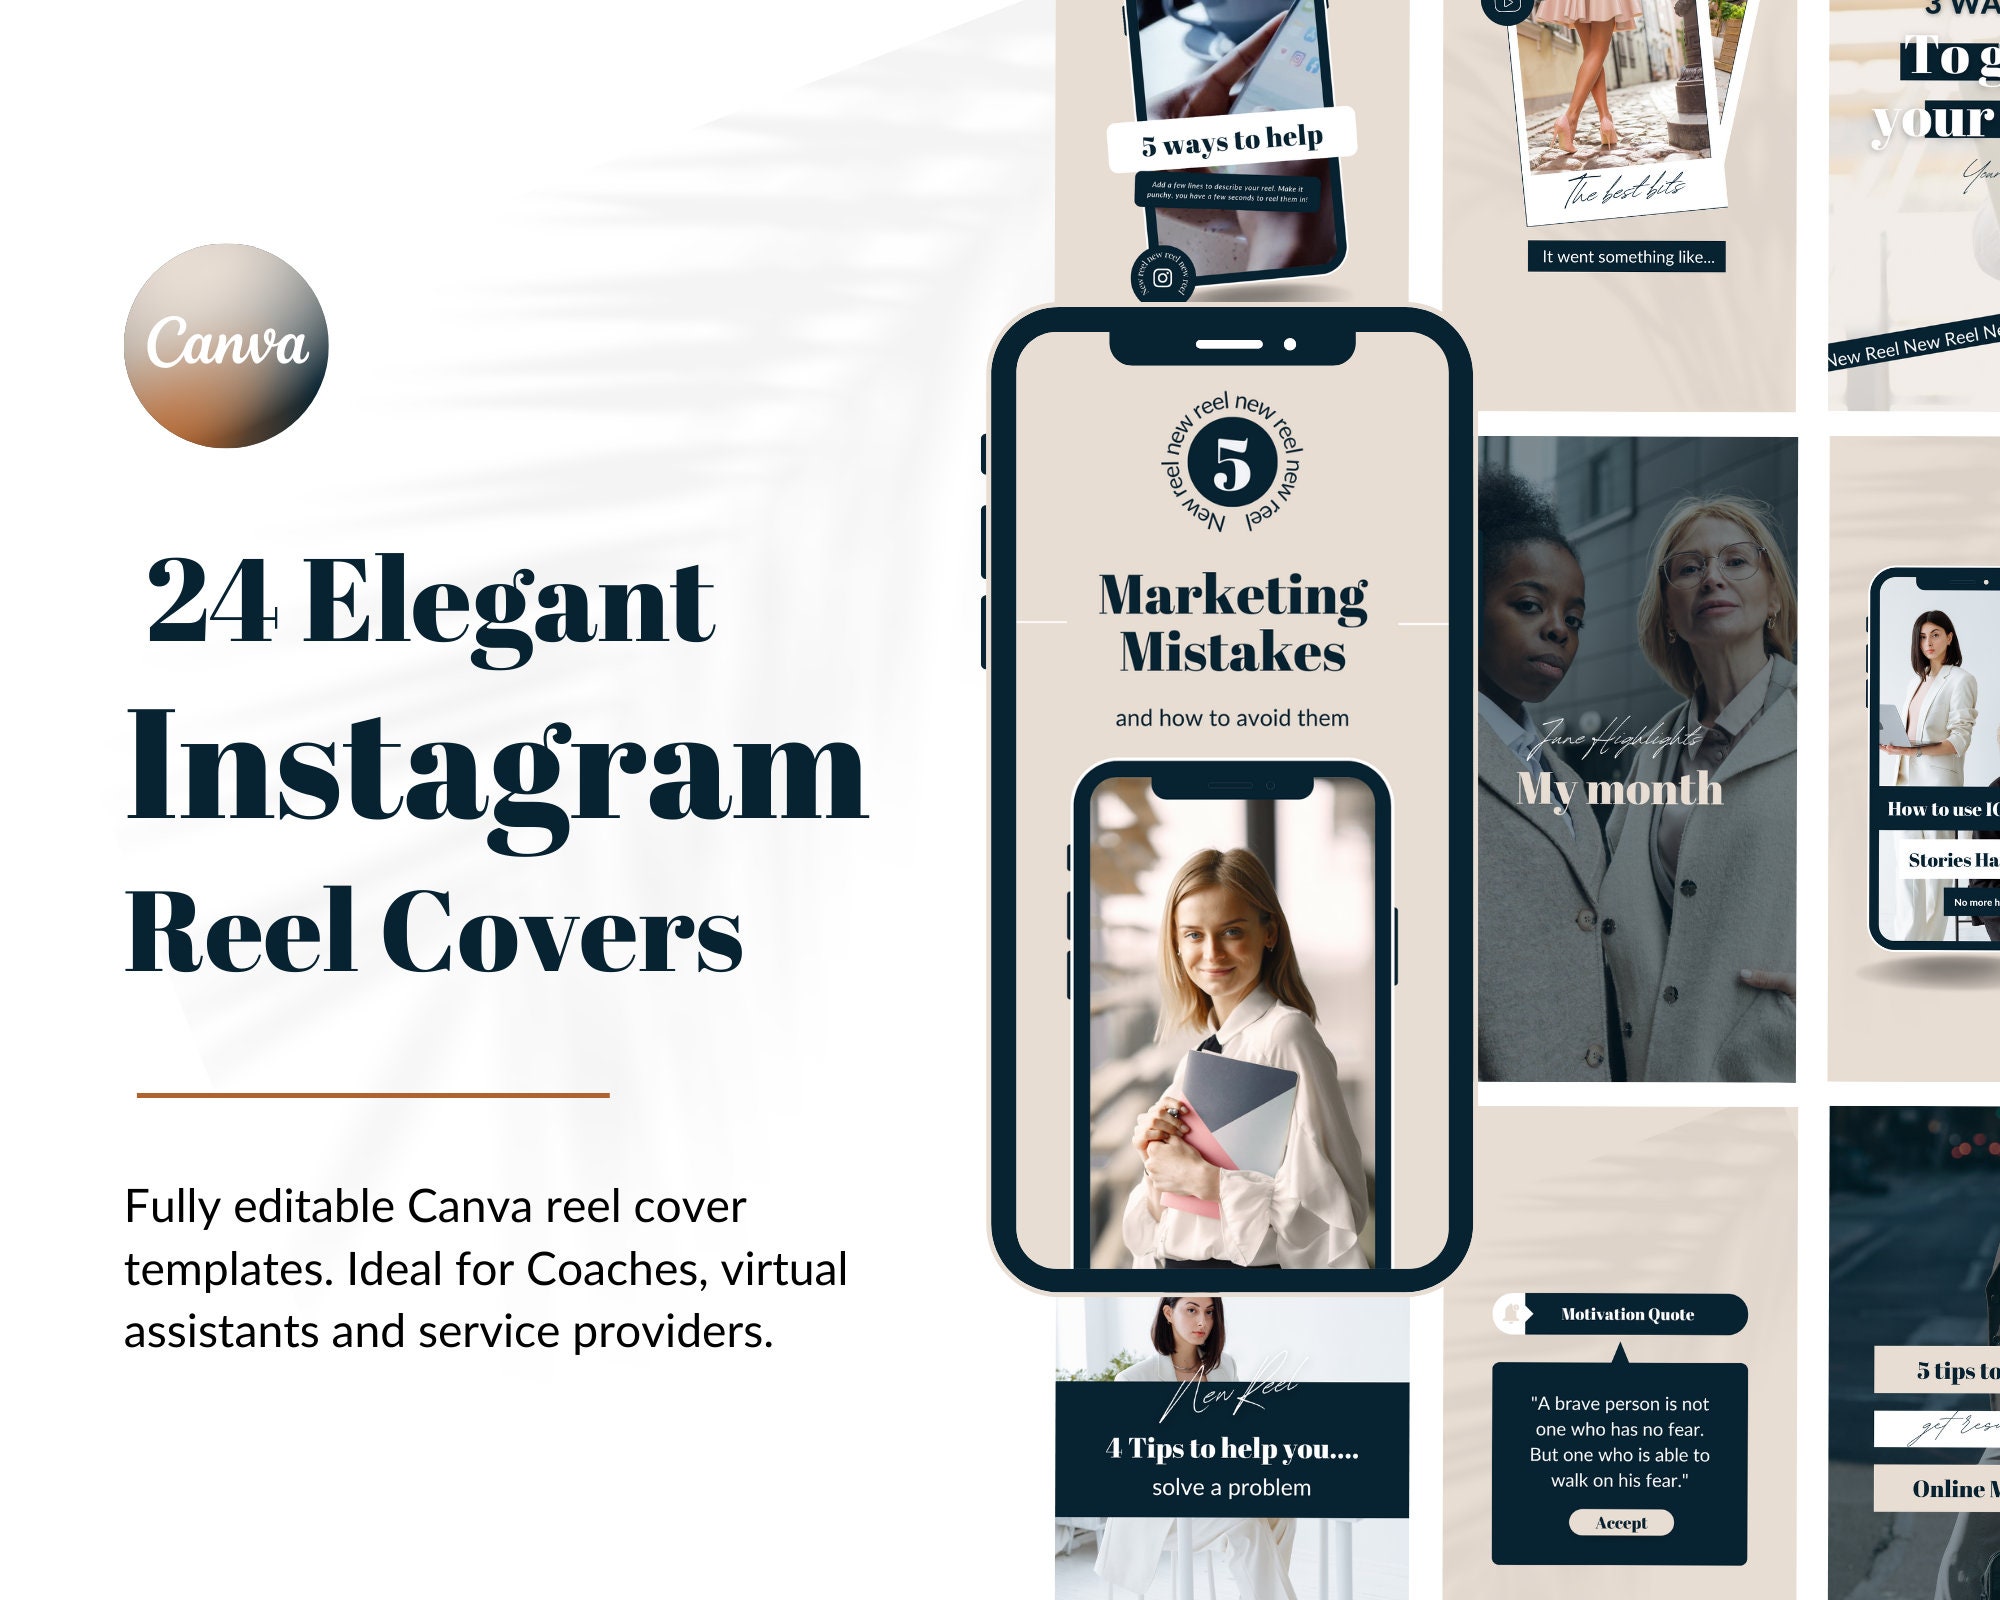 Reels Cover Templates | Instagram Reel Templates | IG Reels Canva Template  | Instagram Reel Templates | Editable Canva Reel Cover